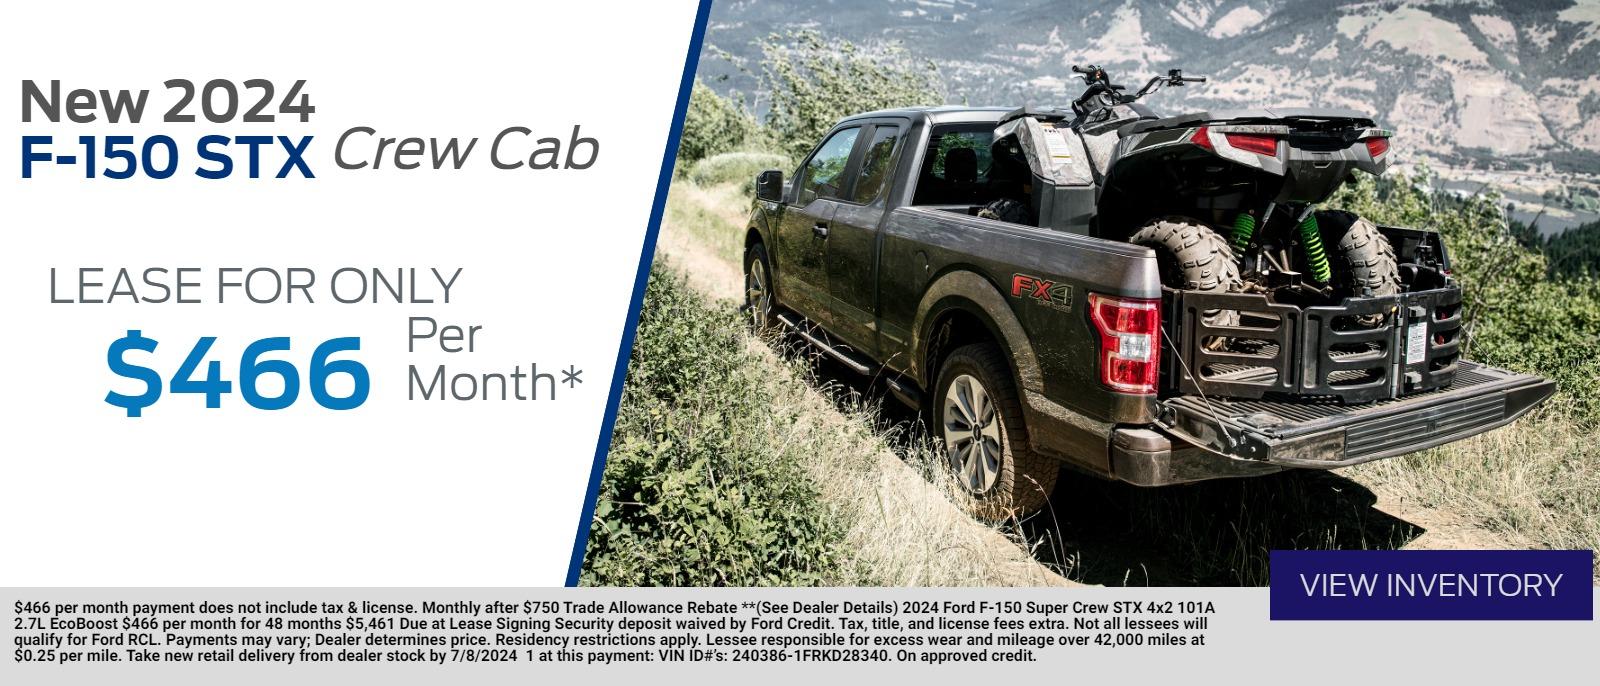 New 2024 
F-150 STX Crew Cab           
Lease for Only

 $ 466   Per Month*
$466 per month payment does not include tax & license. Monthly after $750 Trade Allowance Rebate **(See Dealer Details) 2024 Ford F-150 Super Crew STX 4x2 101A 2.7L EcoBoost $466 per month for 48 months $5,461 Due at Lease Signing Security deposit waived by Ford Credit. Tax, title, and license fees extra. Not all lessees will qualify for Ford RCL. Payments may vary; Dealer determines price. Residency restrictions apply. Lessee responsible for excess wear and mileage over 42,000 miles at $0.25 per mile. Take new retail delivery from dealer stock by 7/8/2024  1 at this payment: VIN ID#’s: 240386-1FRKD28340. On approved credit.